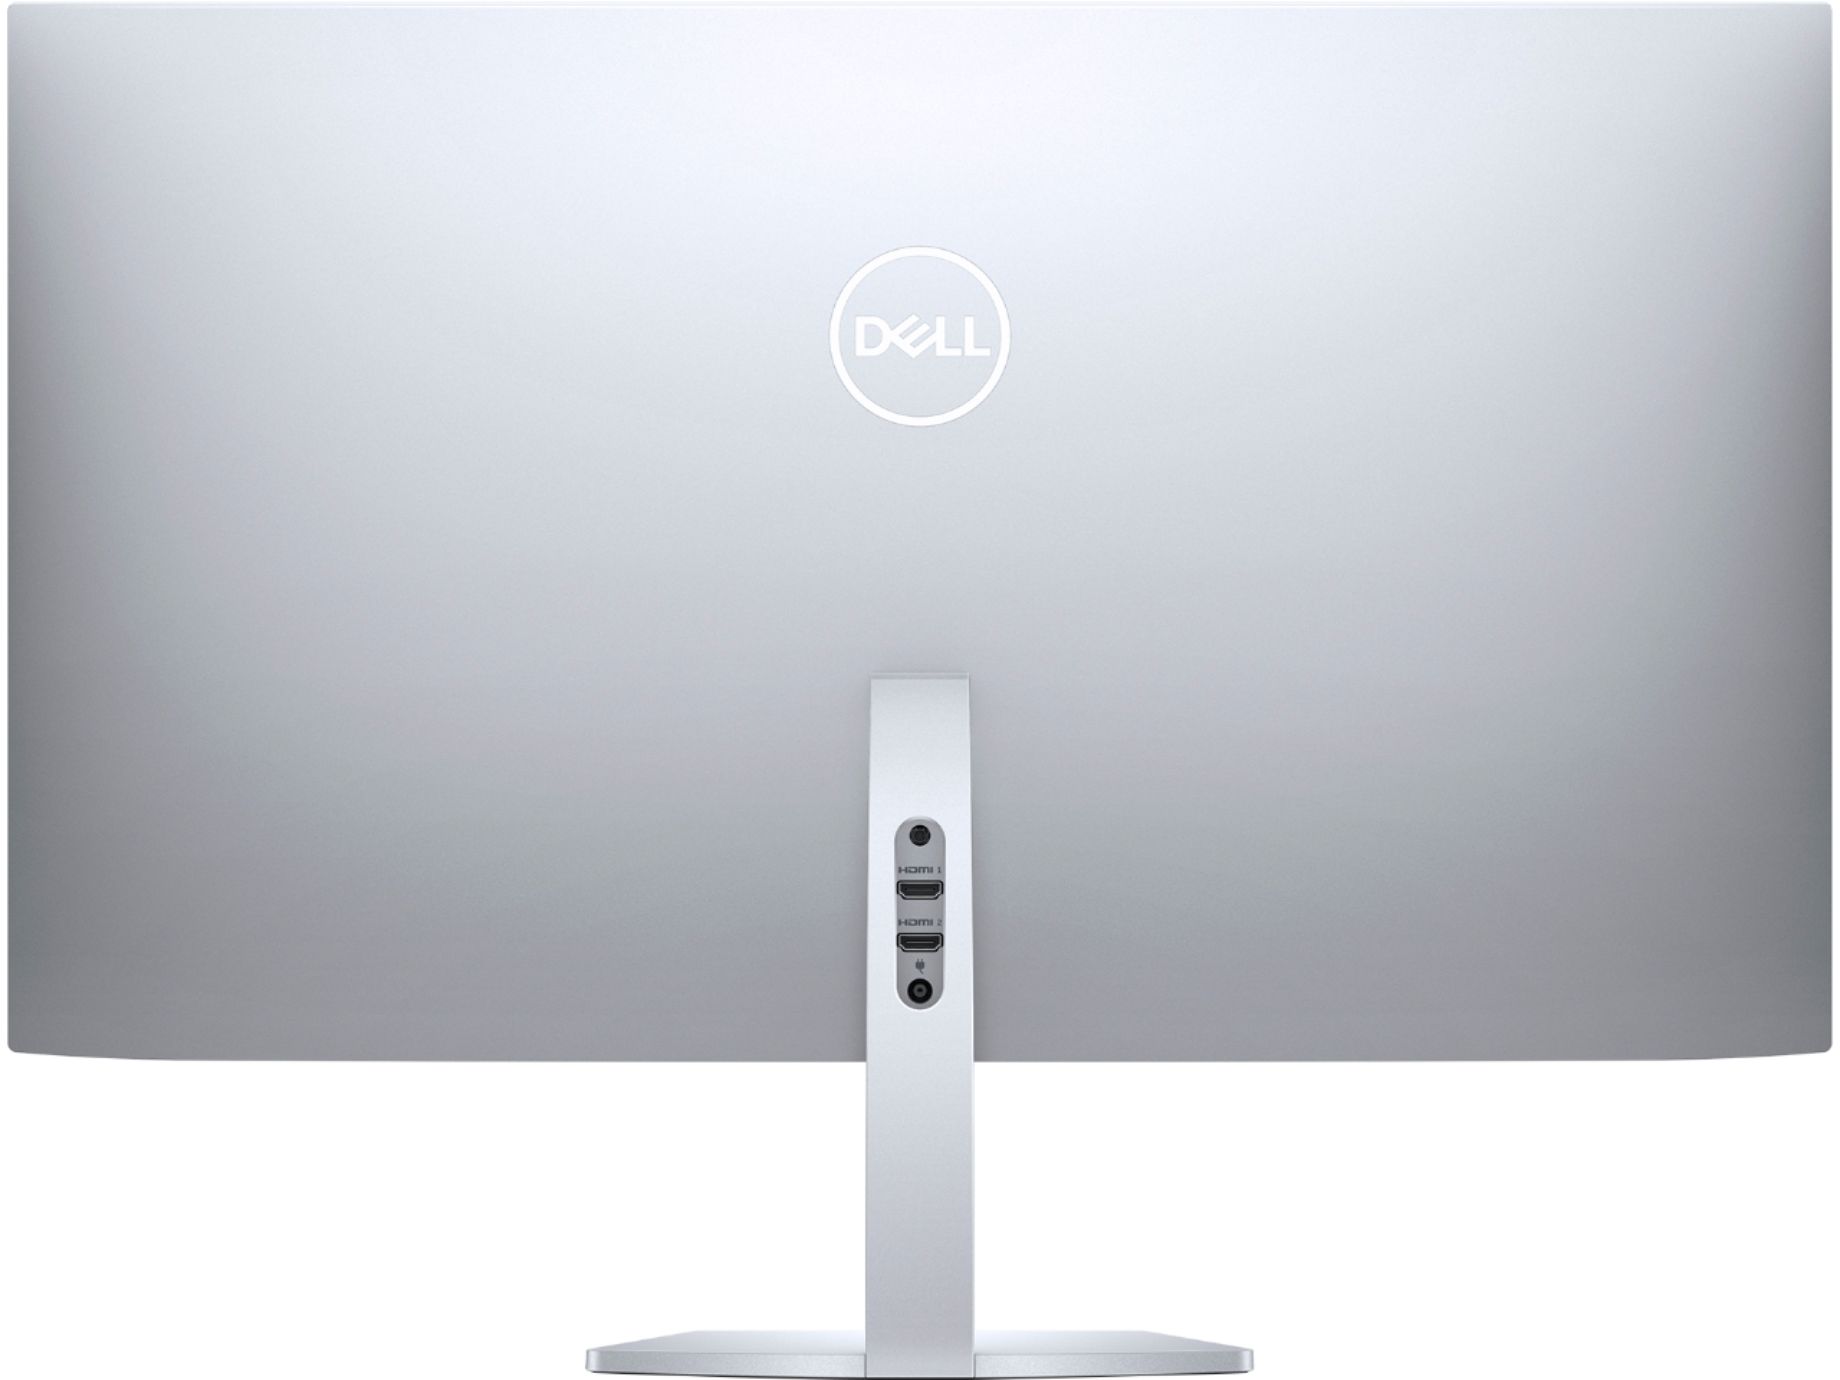 Back View: Dell - 27" IPS LED QHD Monitor with HDR (HDMI)